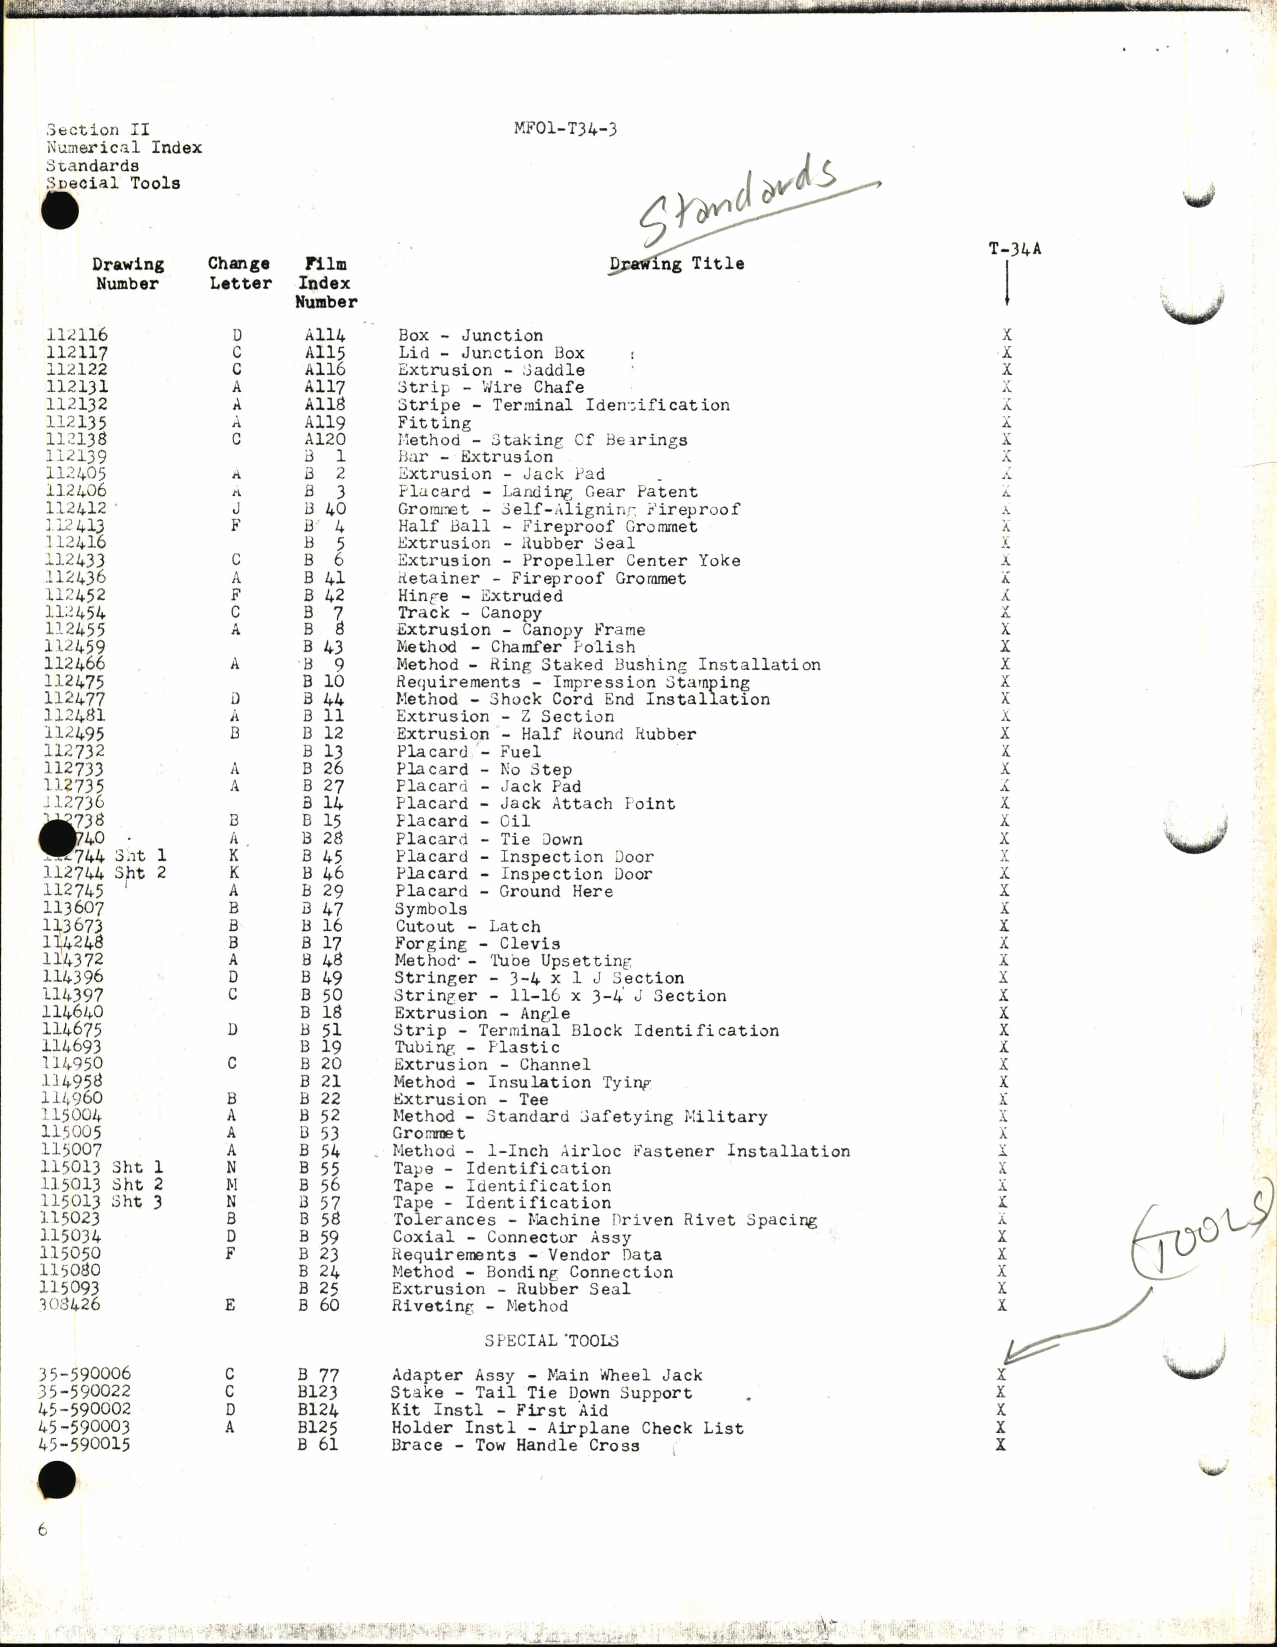 Sample page 9 from AirCorps Library document: Index of Drawings on Microfilm for T-34 Series Aircraft